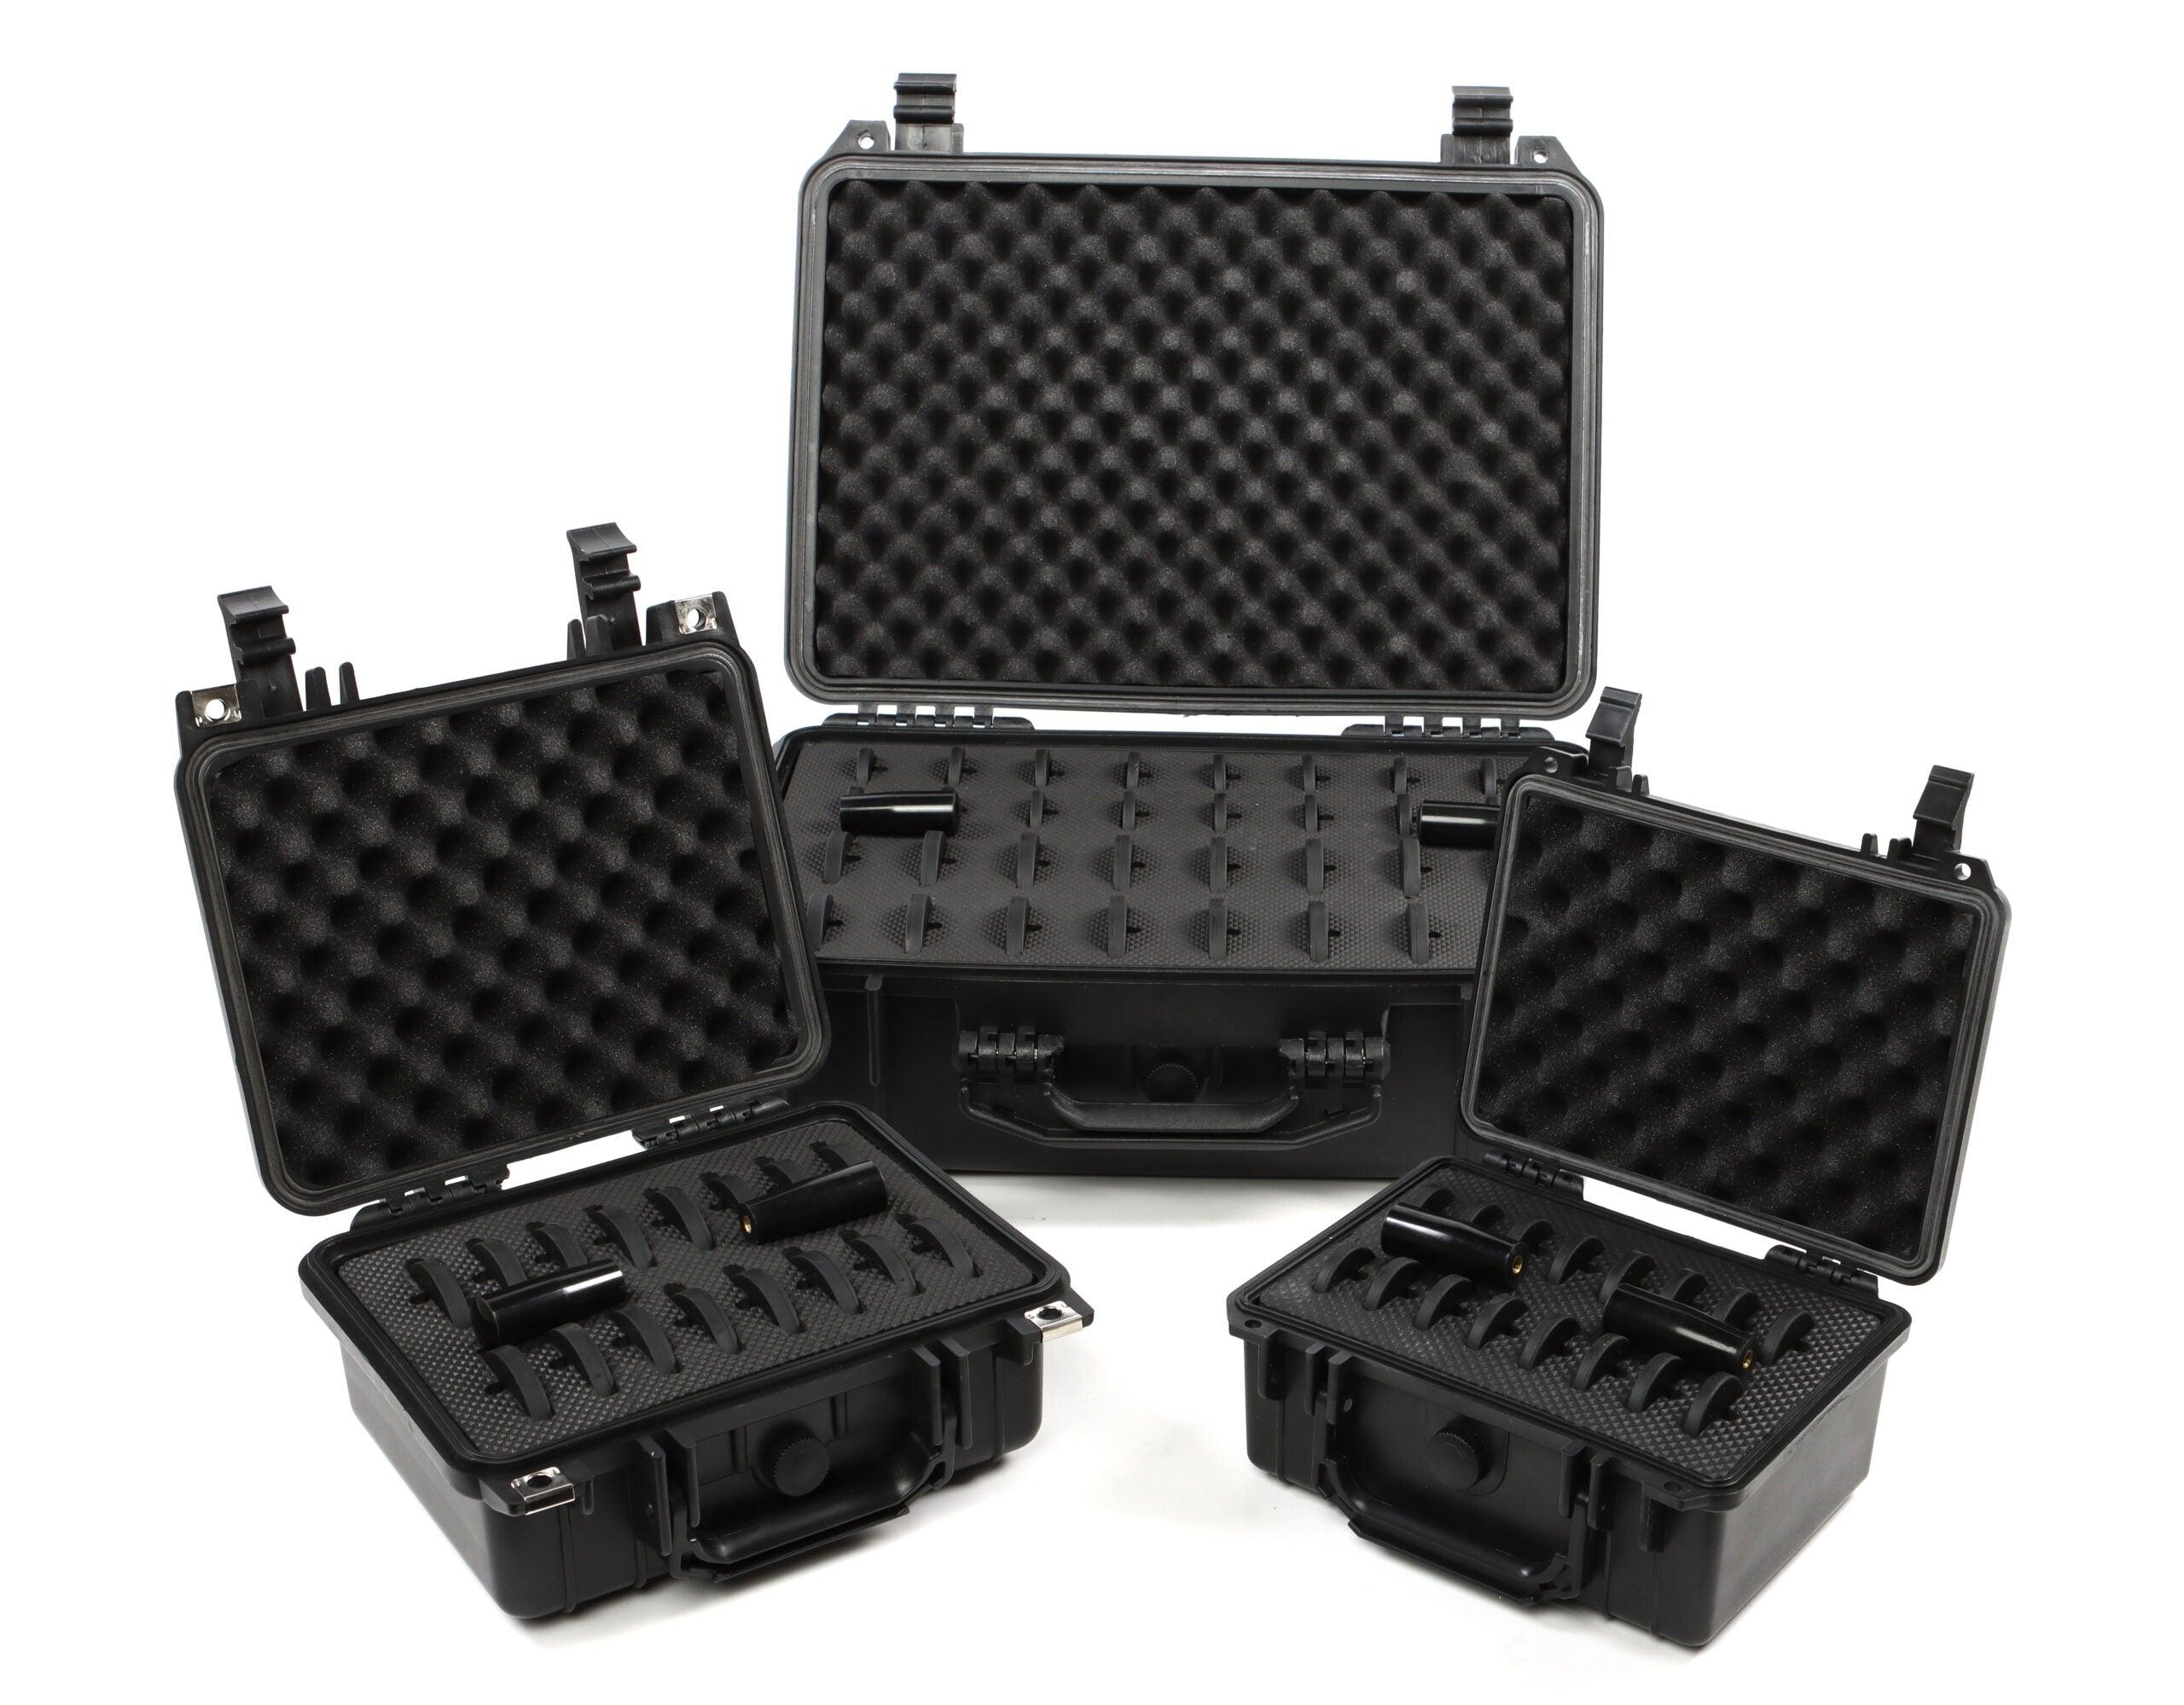 ANDROOKIE MAGNET KITS - Cinegear Middle-East S.A.L